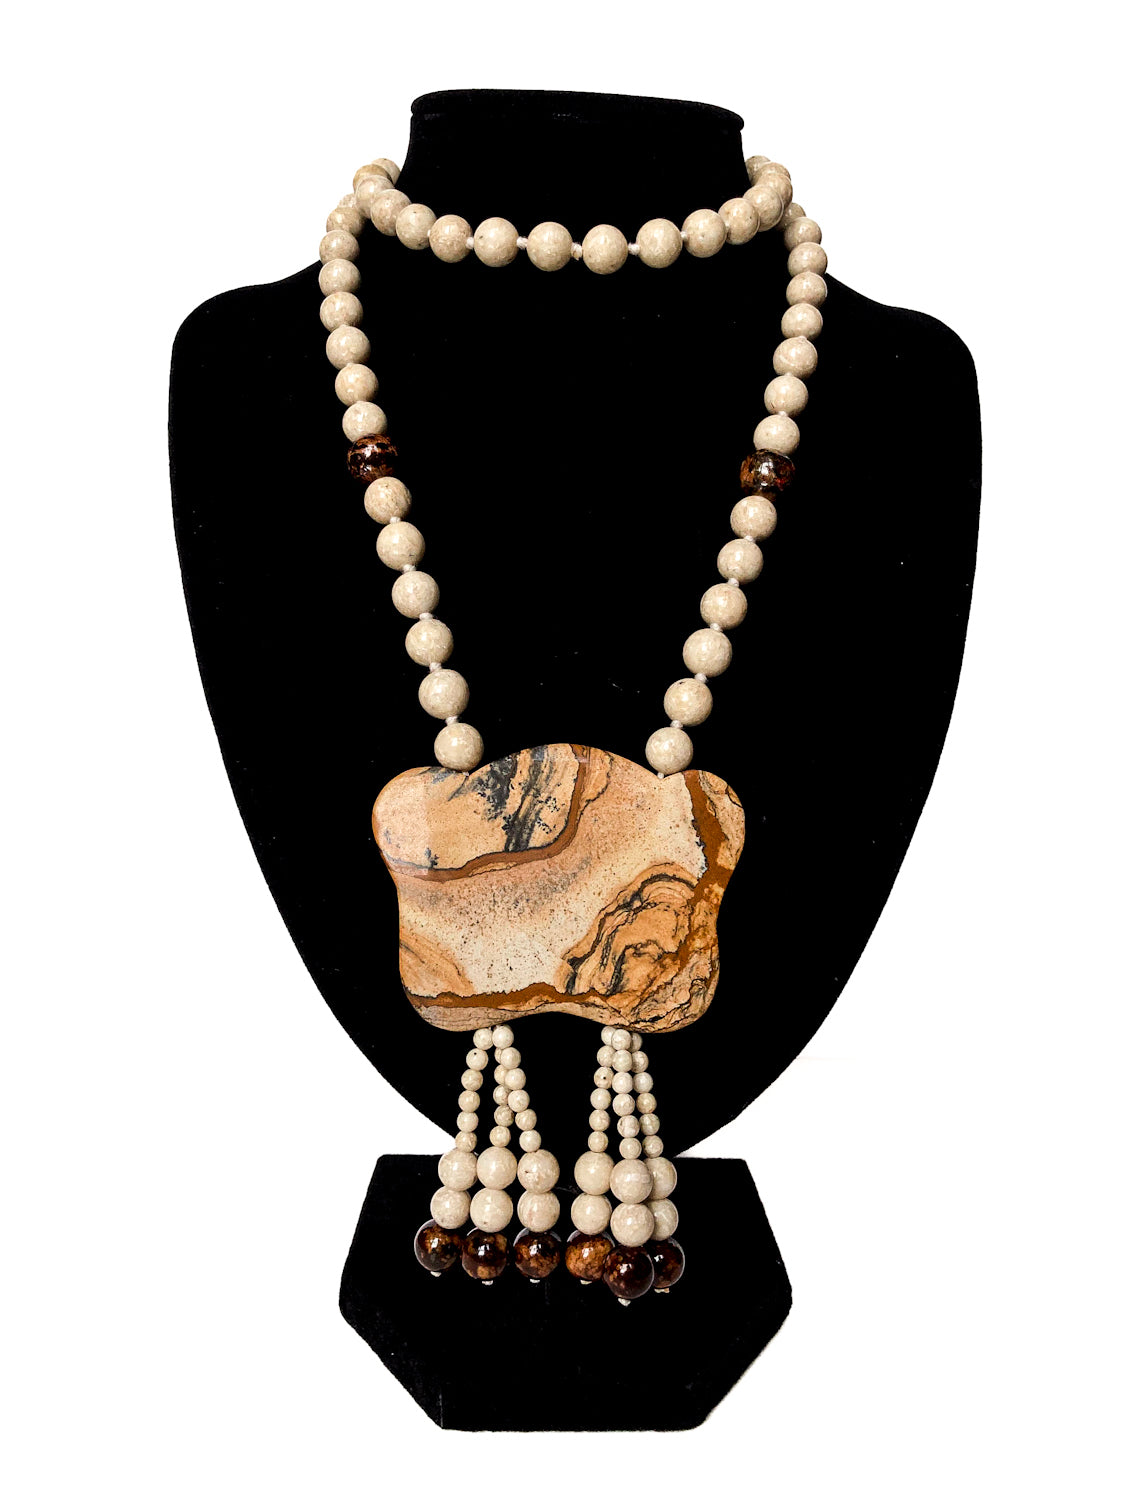 Stunning Natural Stone Pendant Hand Knotted Bead Tassel Statement Necklace